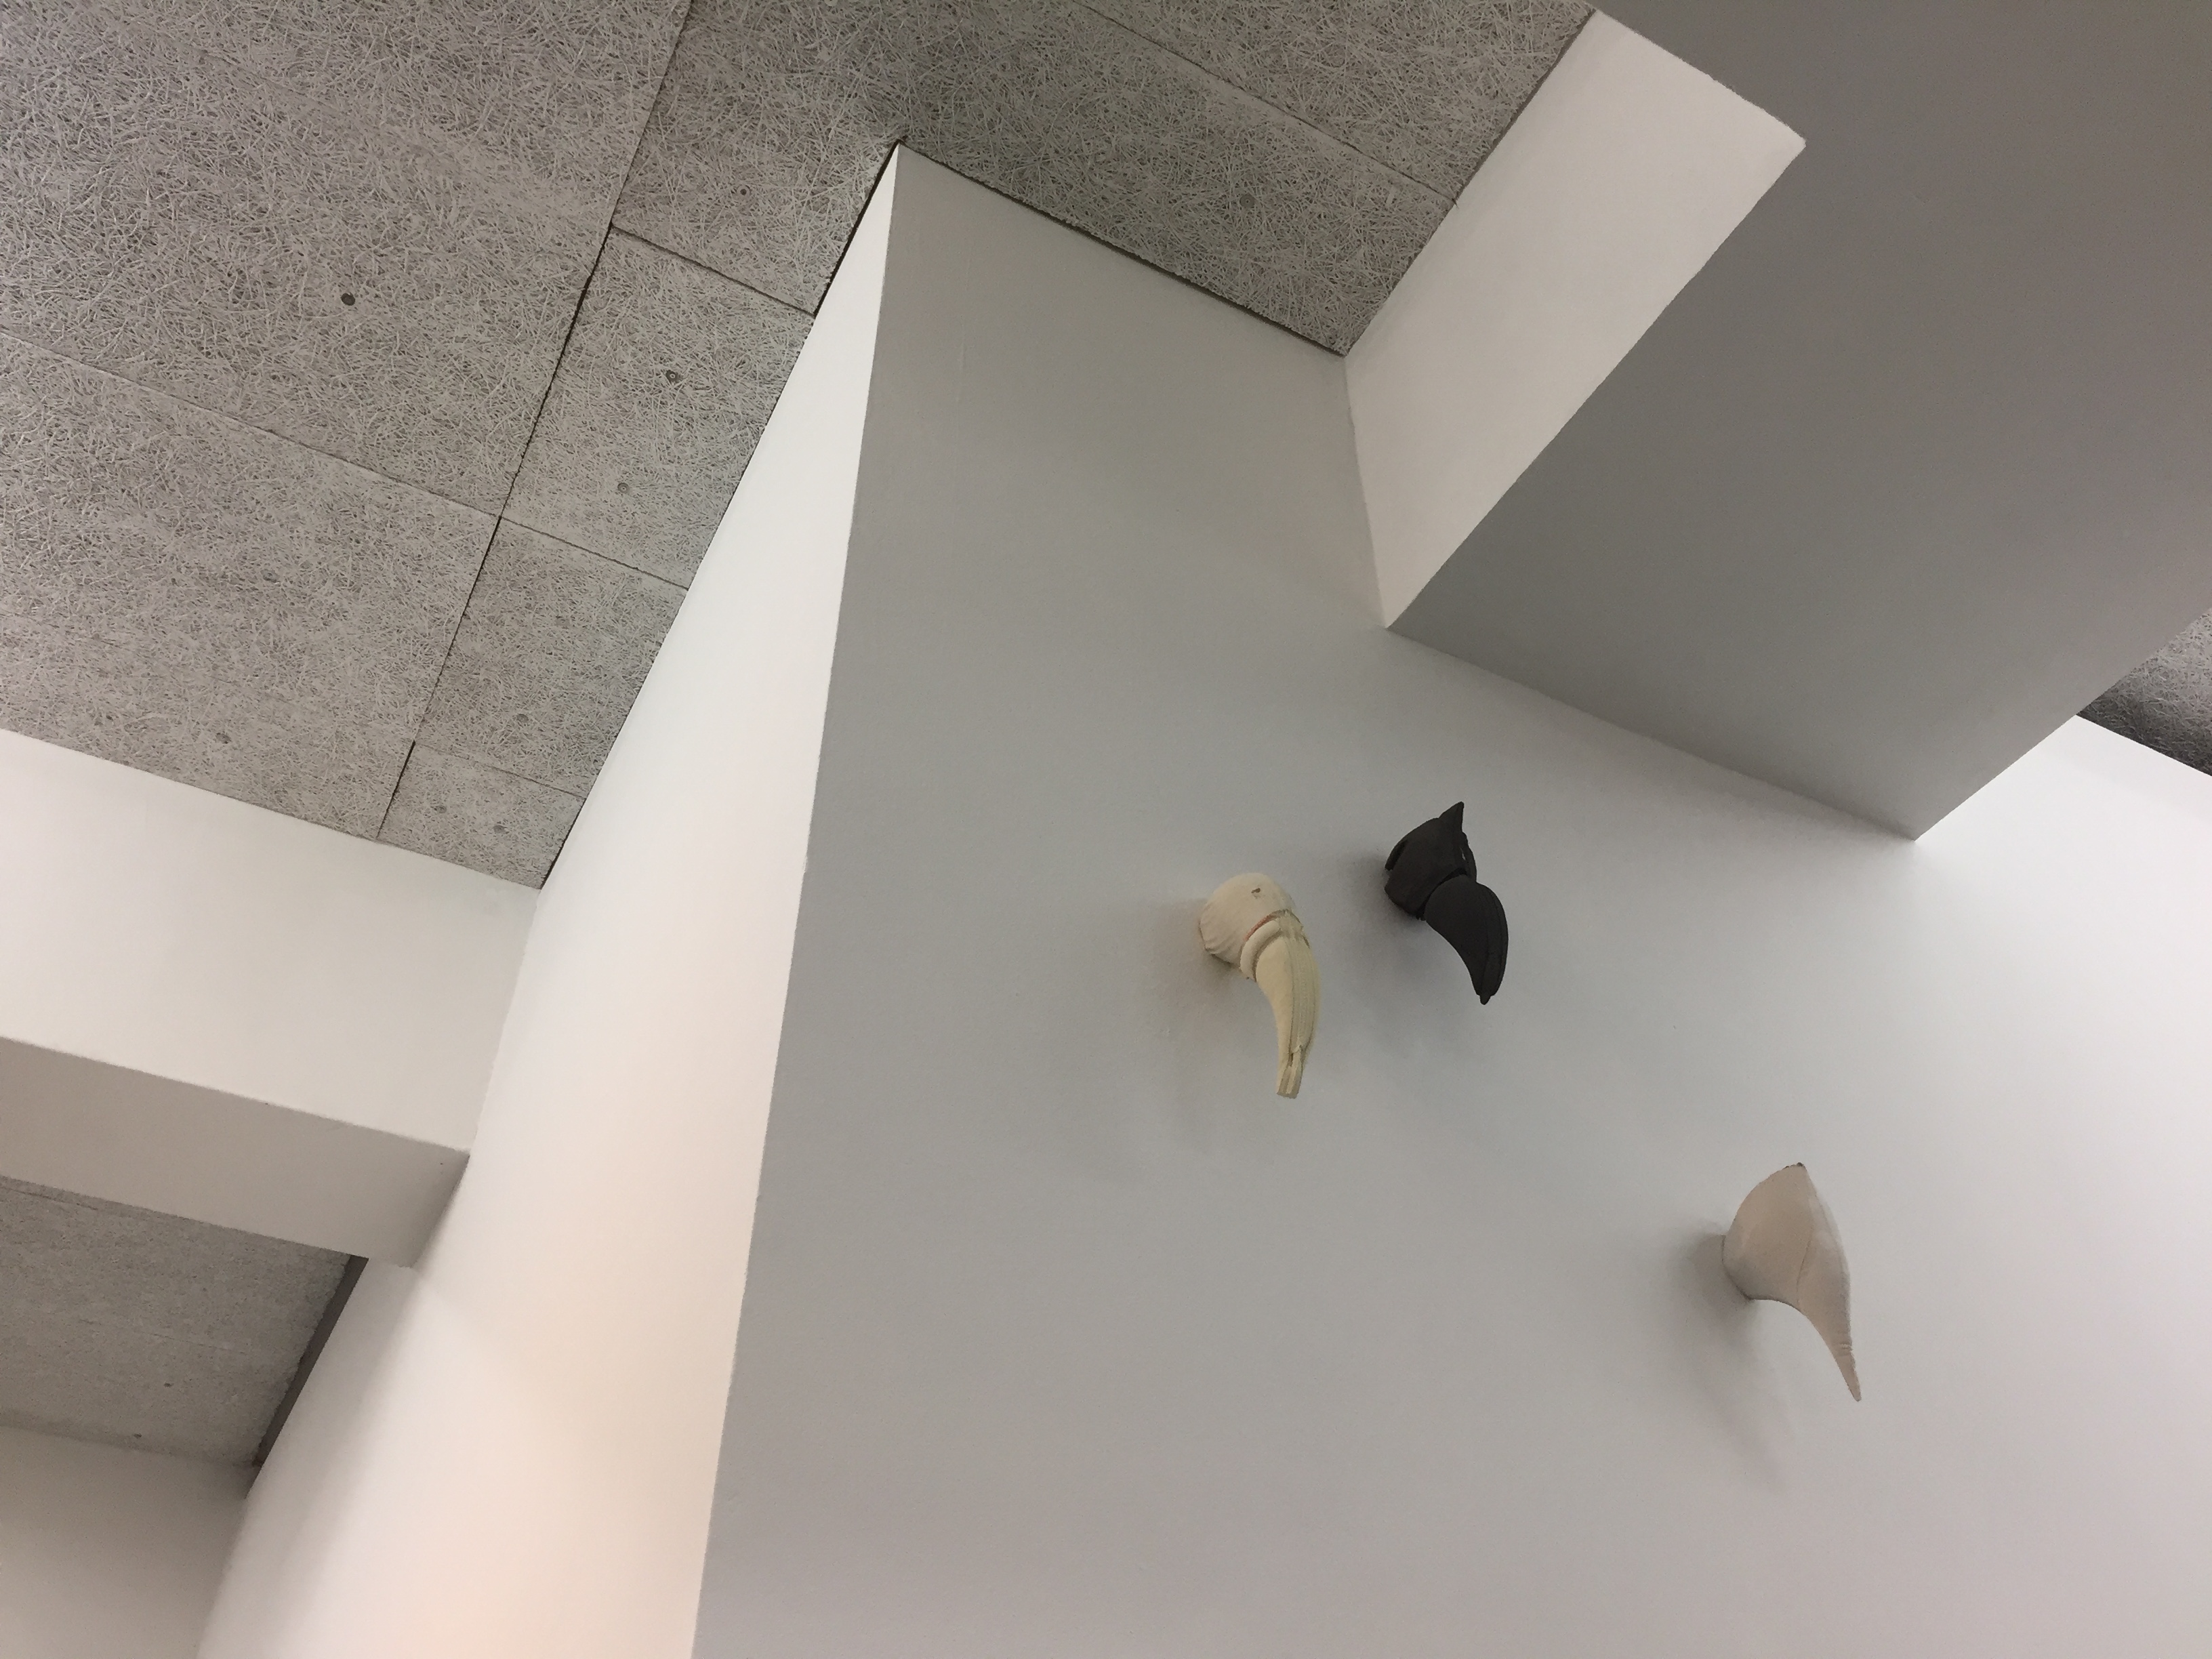 11 Flock, 2011 to 14, plaster, concrete, various sizes (casts of insides of bras) photo Adrienne Groen